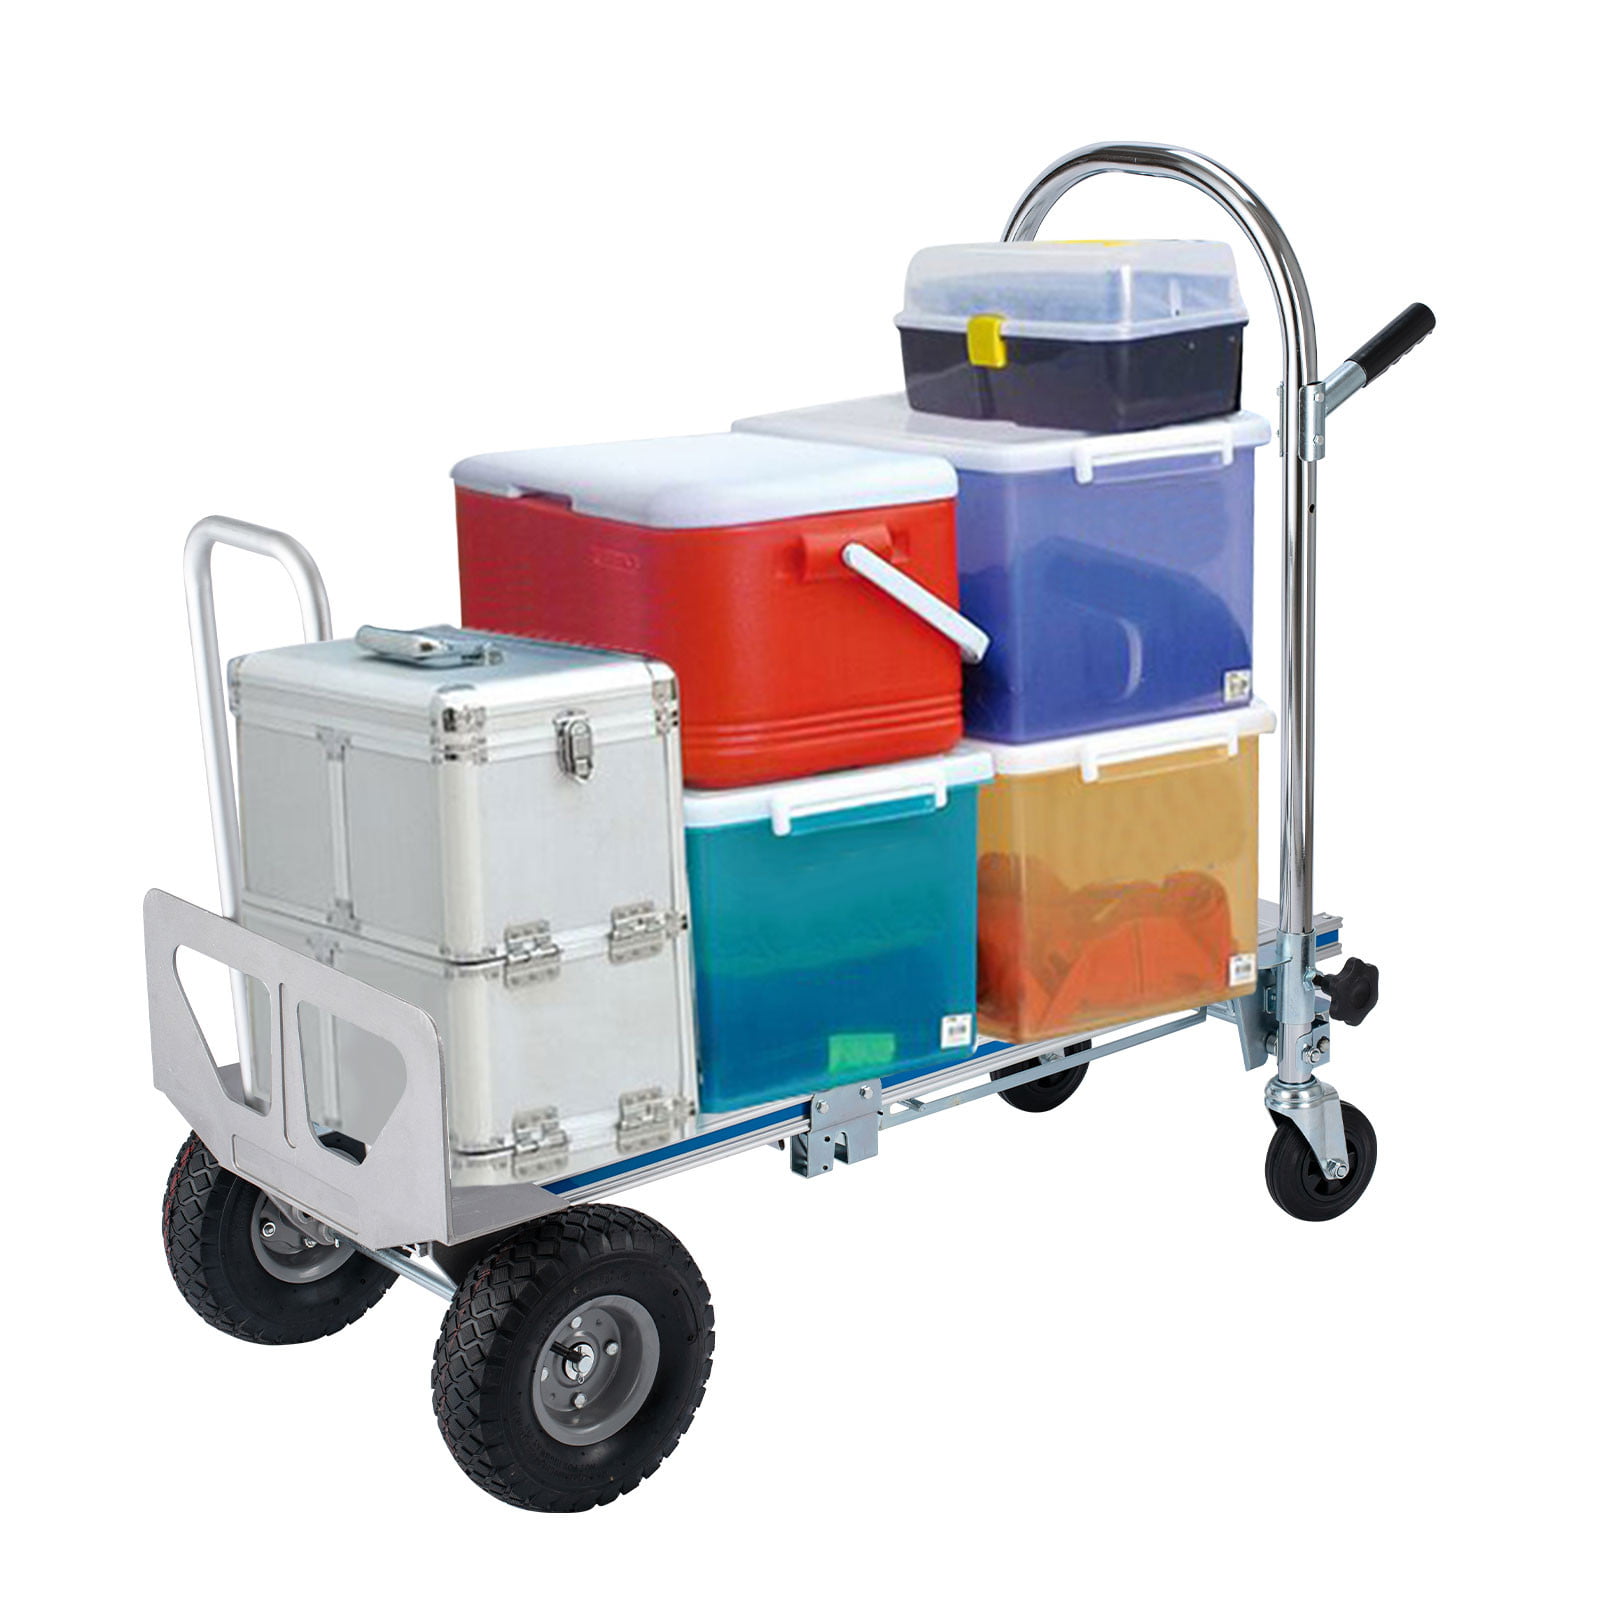 Details about   350KG Bearing Aluminum Folding Sack Truck 3in1 Foldable Car Hand Trolley Cart